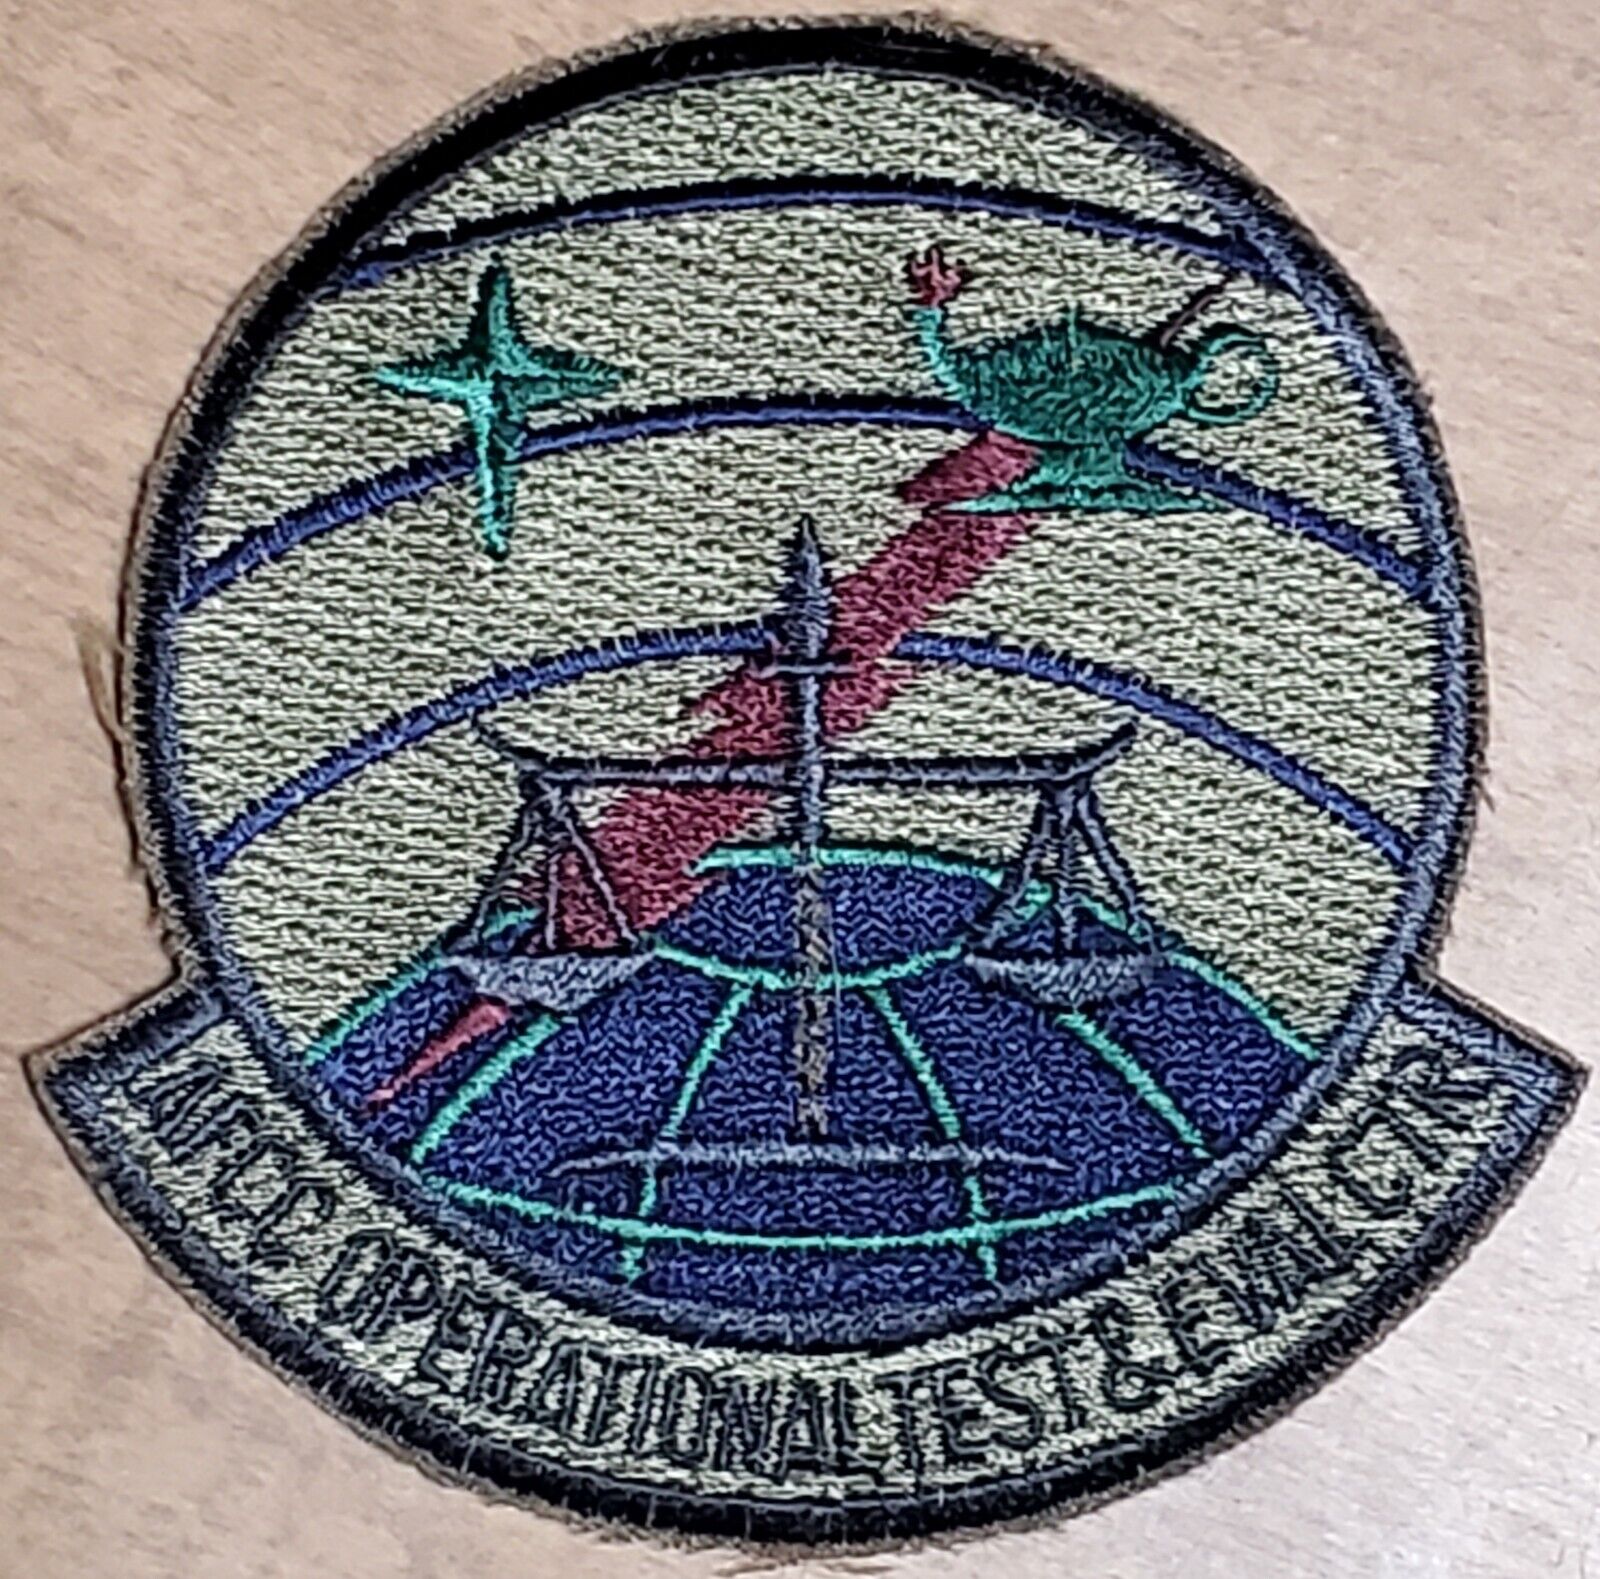 USAF subdued Patch - AFCC Operational Test & Eval Center Communications Command